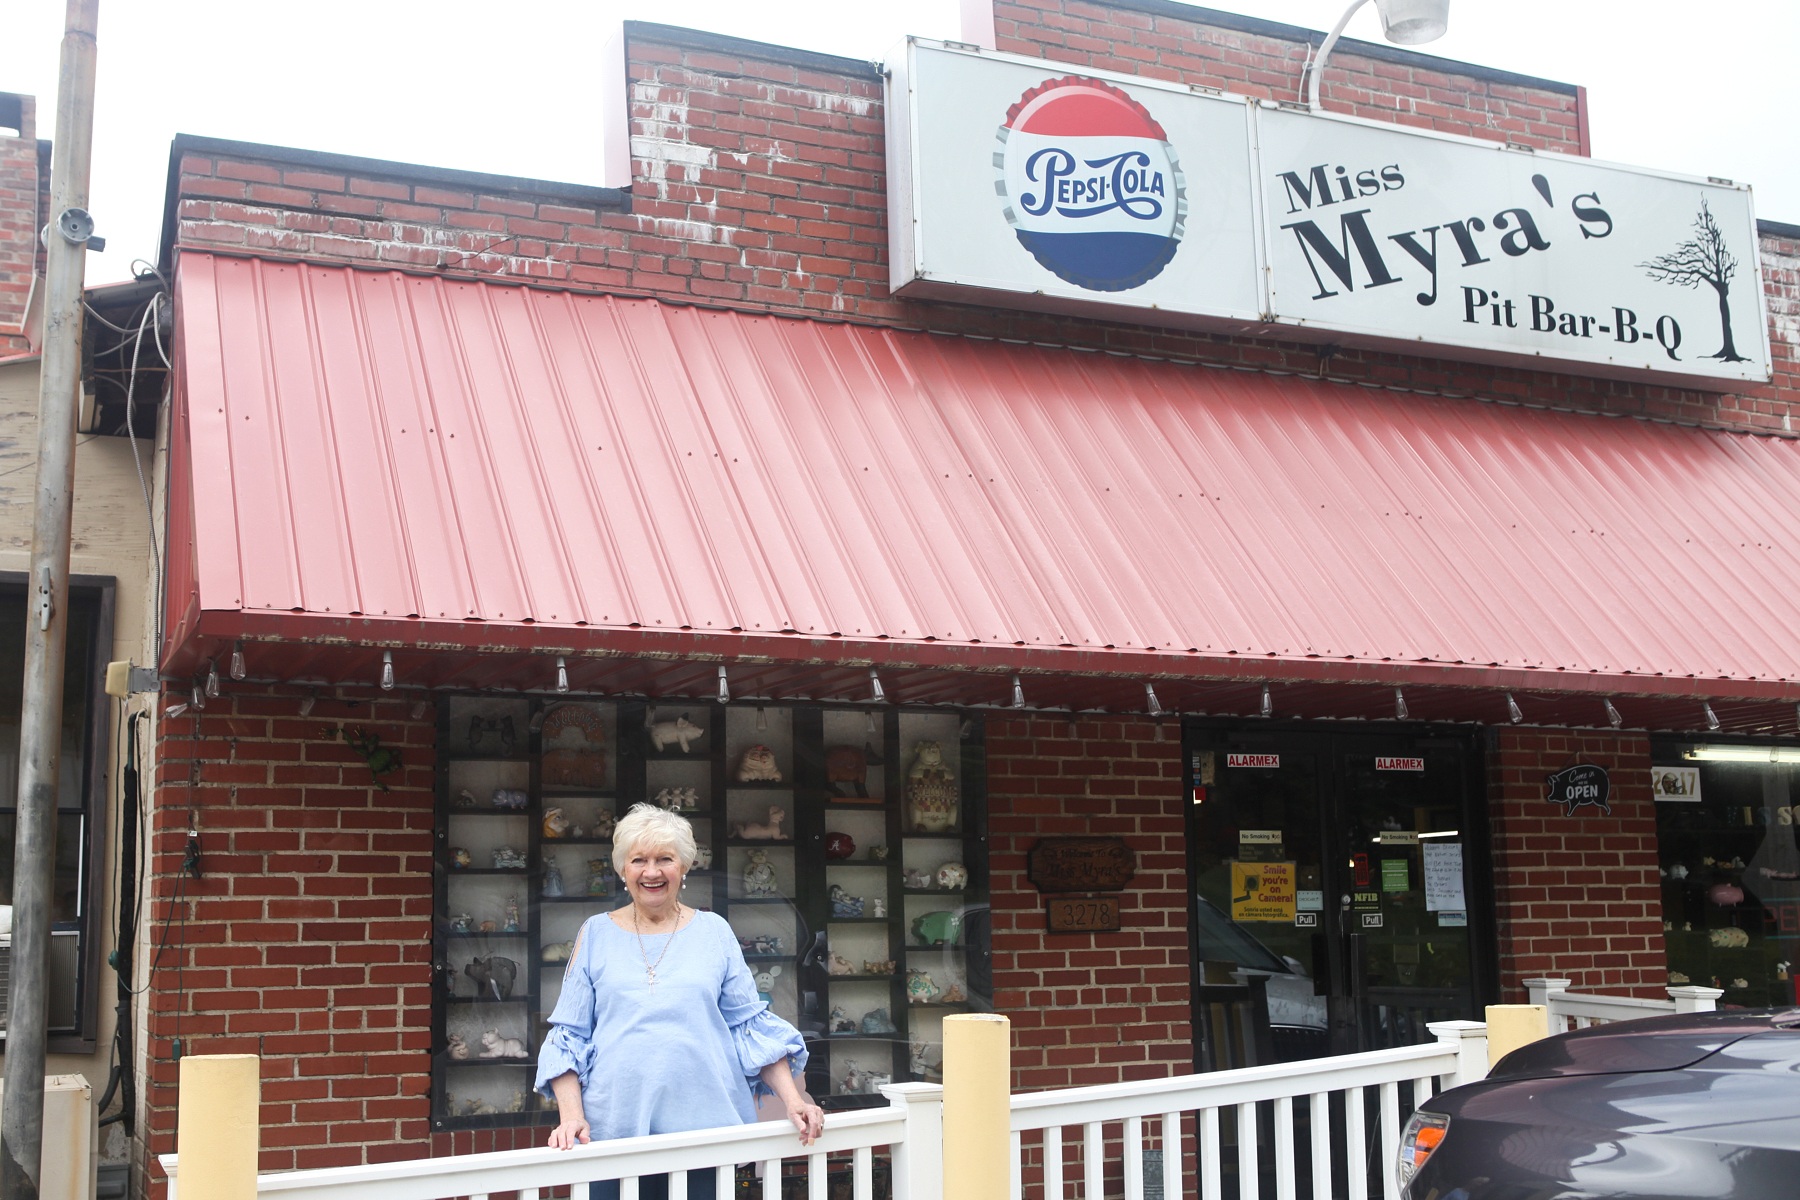 Myra Grissom Harper, a.k.a. "Miss Myra" of Miss Myra’s Pit Bar-B-Q stands proudly before her pit Bar-B-Q joint in Cahaba Heights.